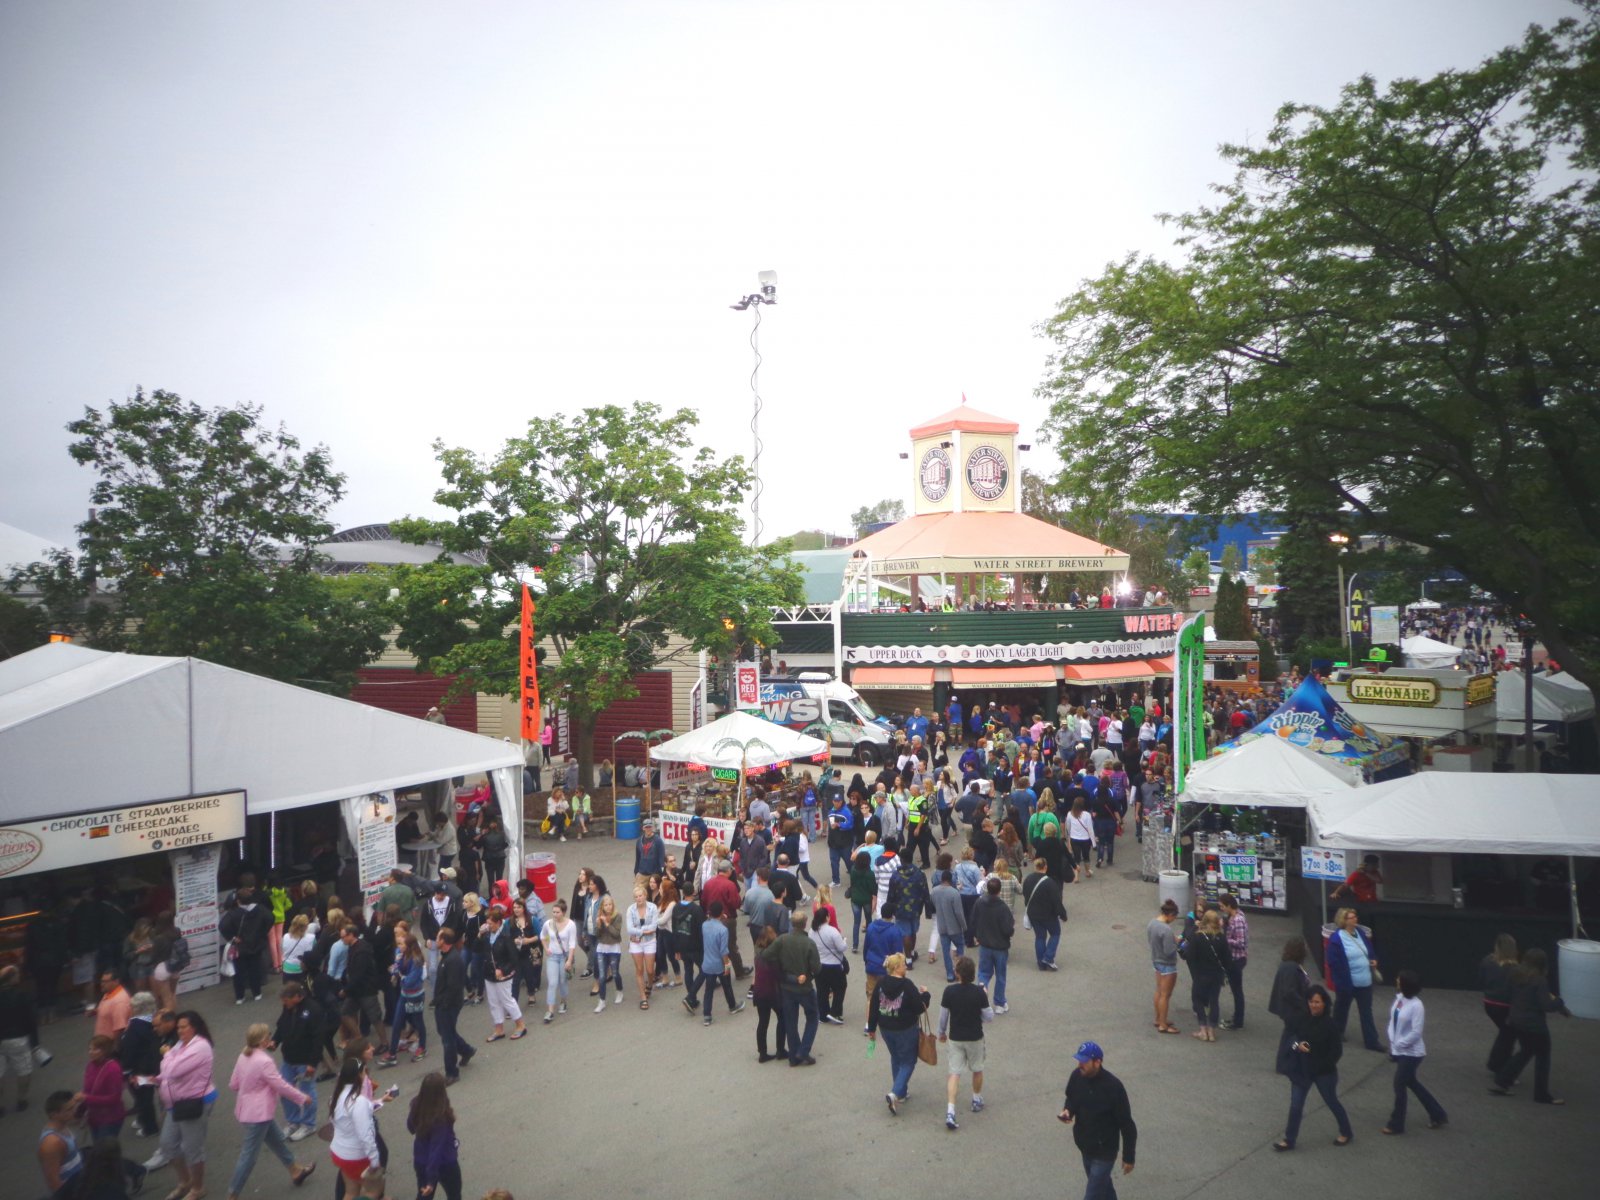 A view from above the Summerfest grounds.